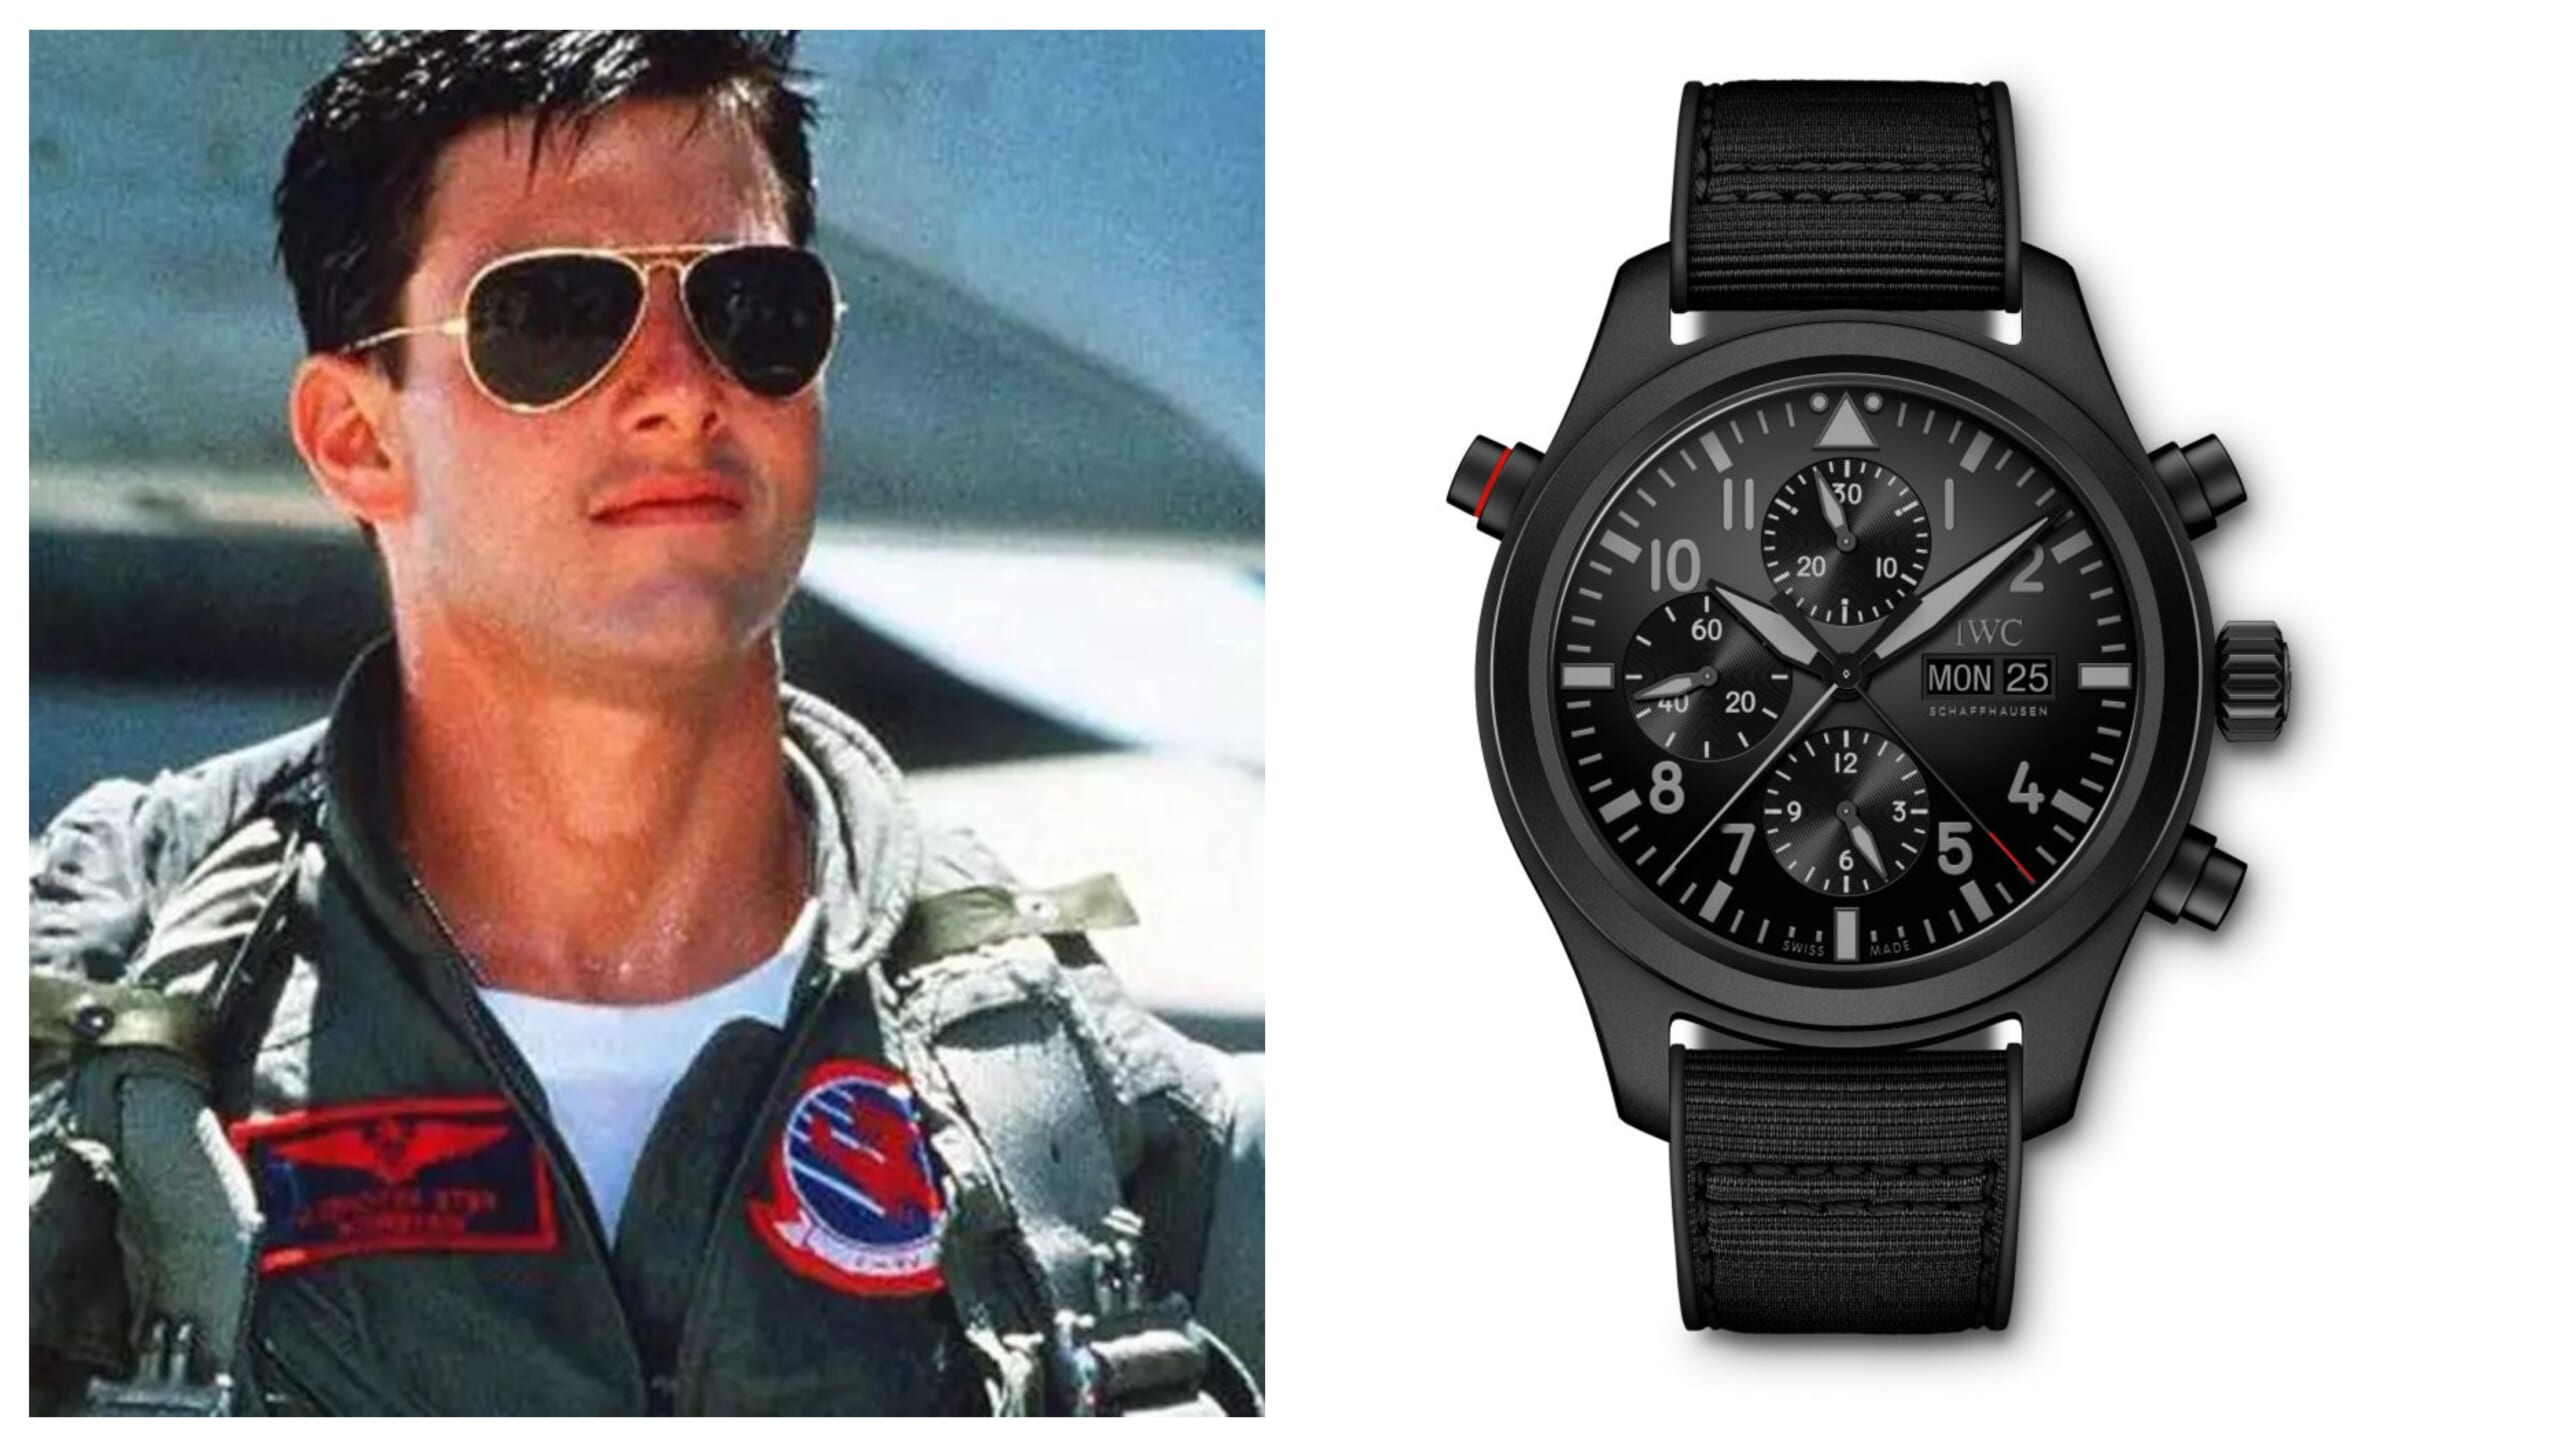 This Top Gun Inspired Pilot Watch Is A Highway To The Danger Zone Maxim